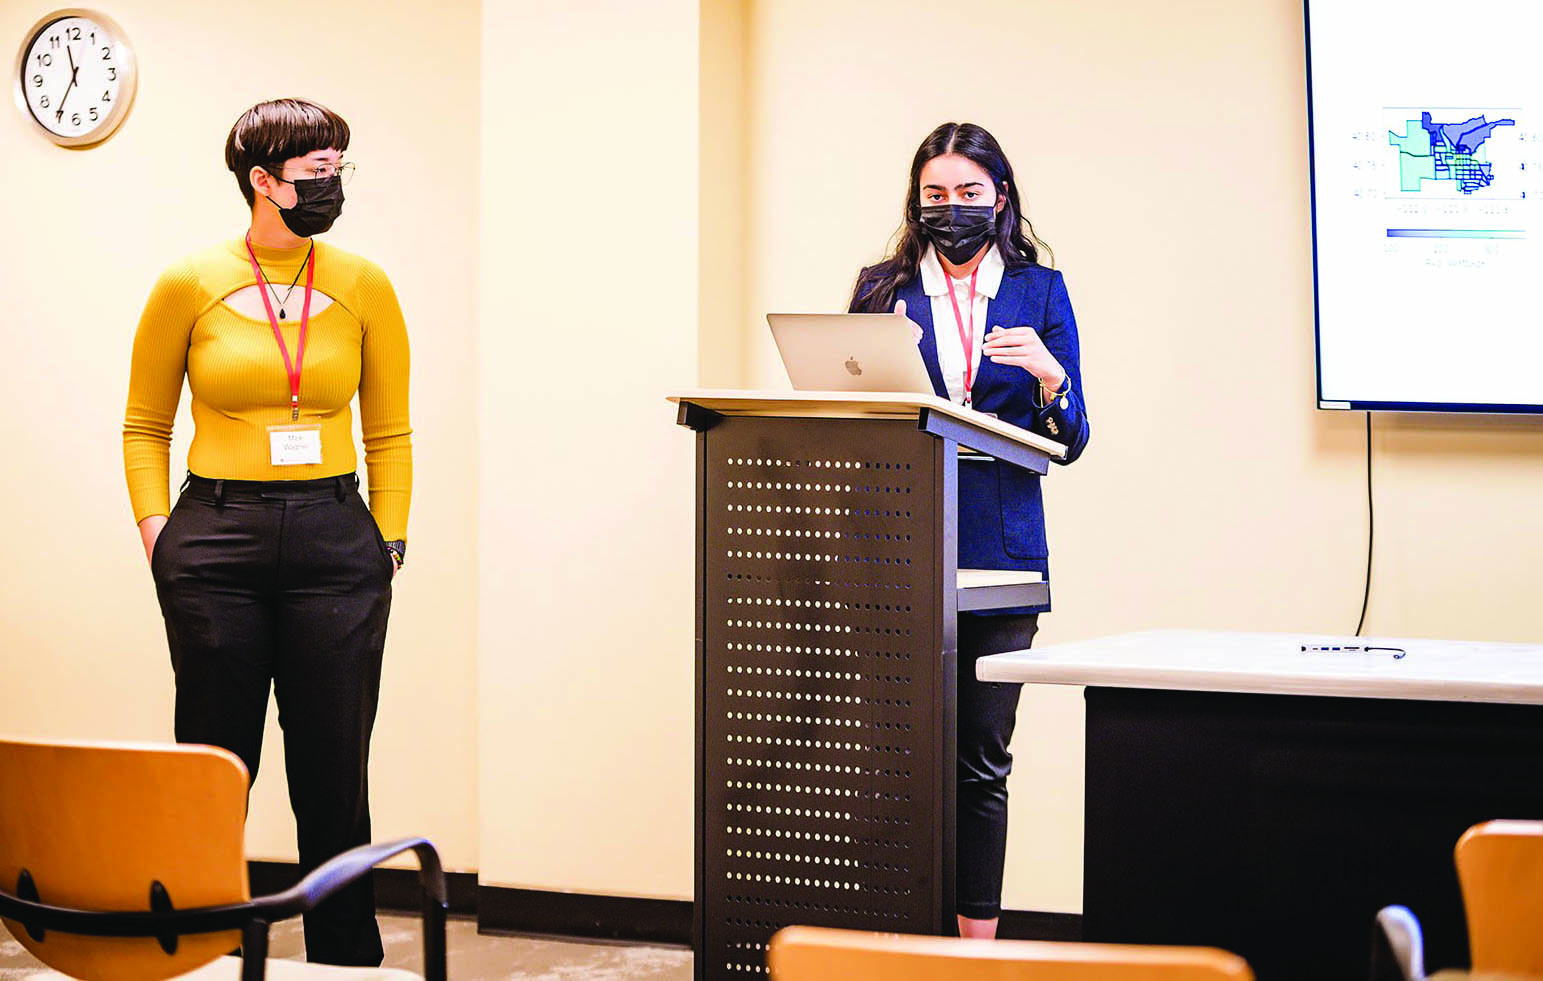 Mick Wagner (left) and Muskan Walia present their results from the University of Utah’s Datathon4Justice at the university’s Undergraduate Research Symposium, which commenced in April 2022. Photo courtesy of the University of Utah’s Office of Undergraduate Research.